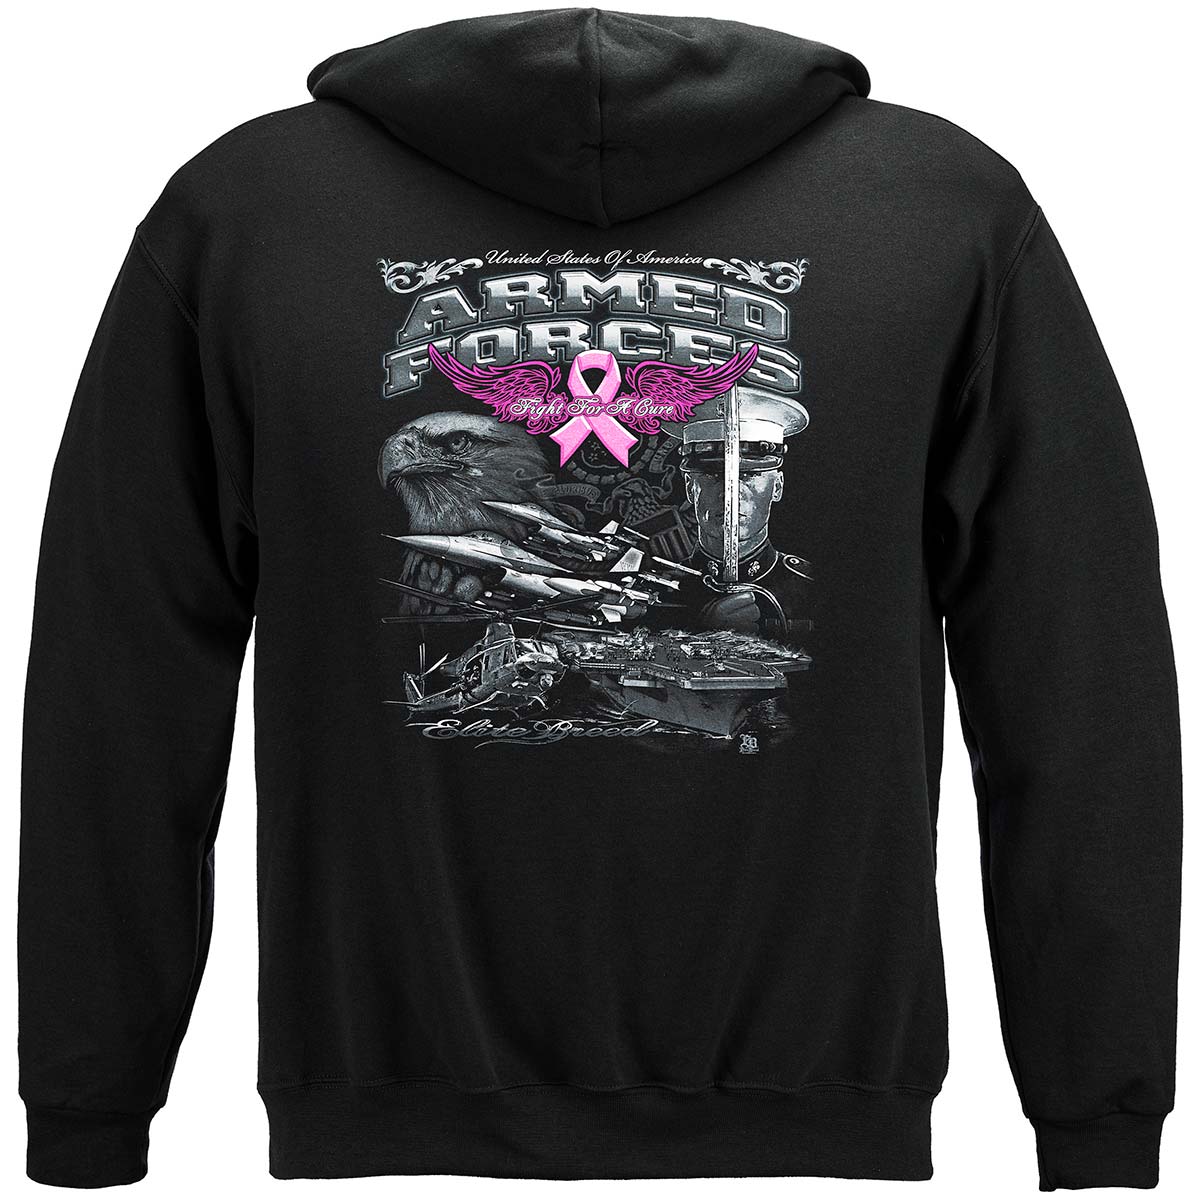 Elite Breed Armed Forces Fight Cancer Premium Hooded Sweat Shirt